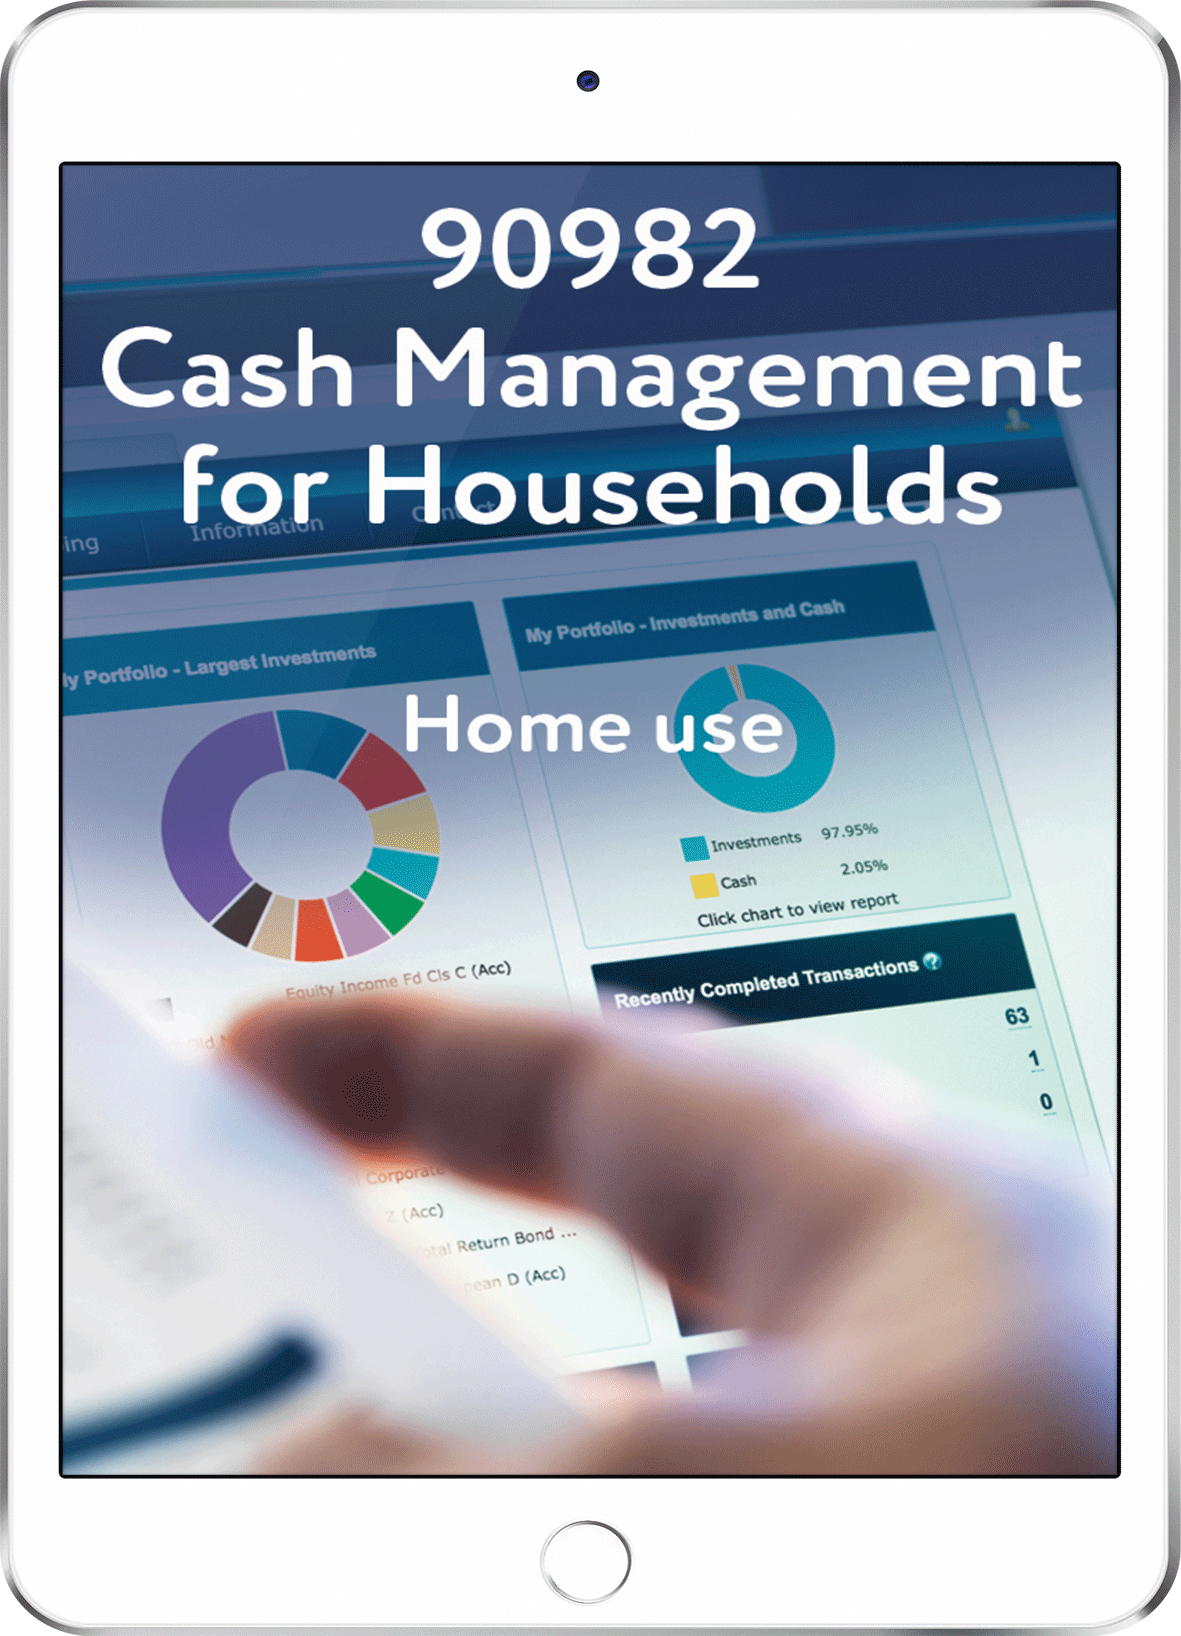 90982 Cash Management for Households - Home Use